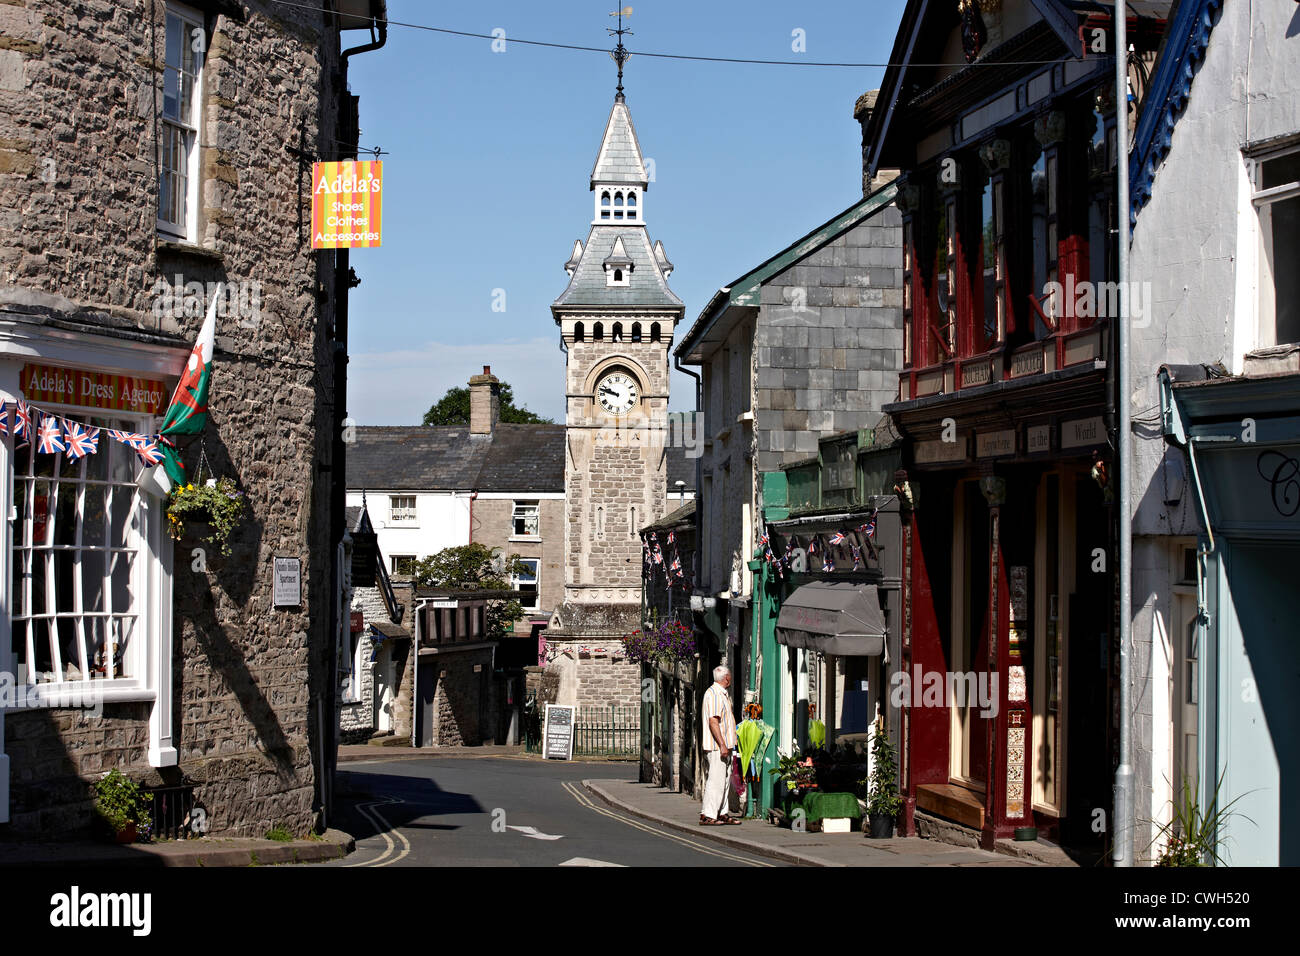 Town of Hay on Wye or Hay-on-Wye in the county of Herefordshire near Powys. Home of Bookshops and the Hay on Wye book festival. Stock Photo